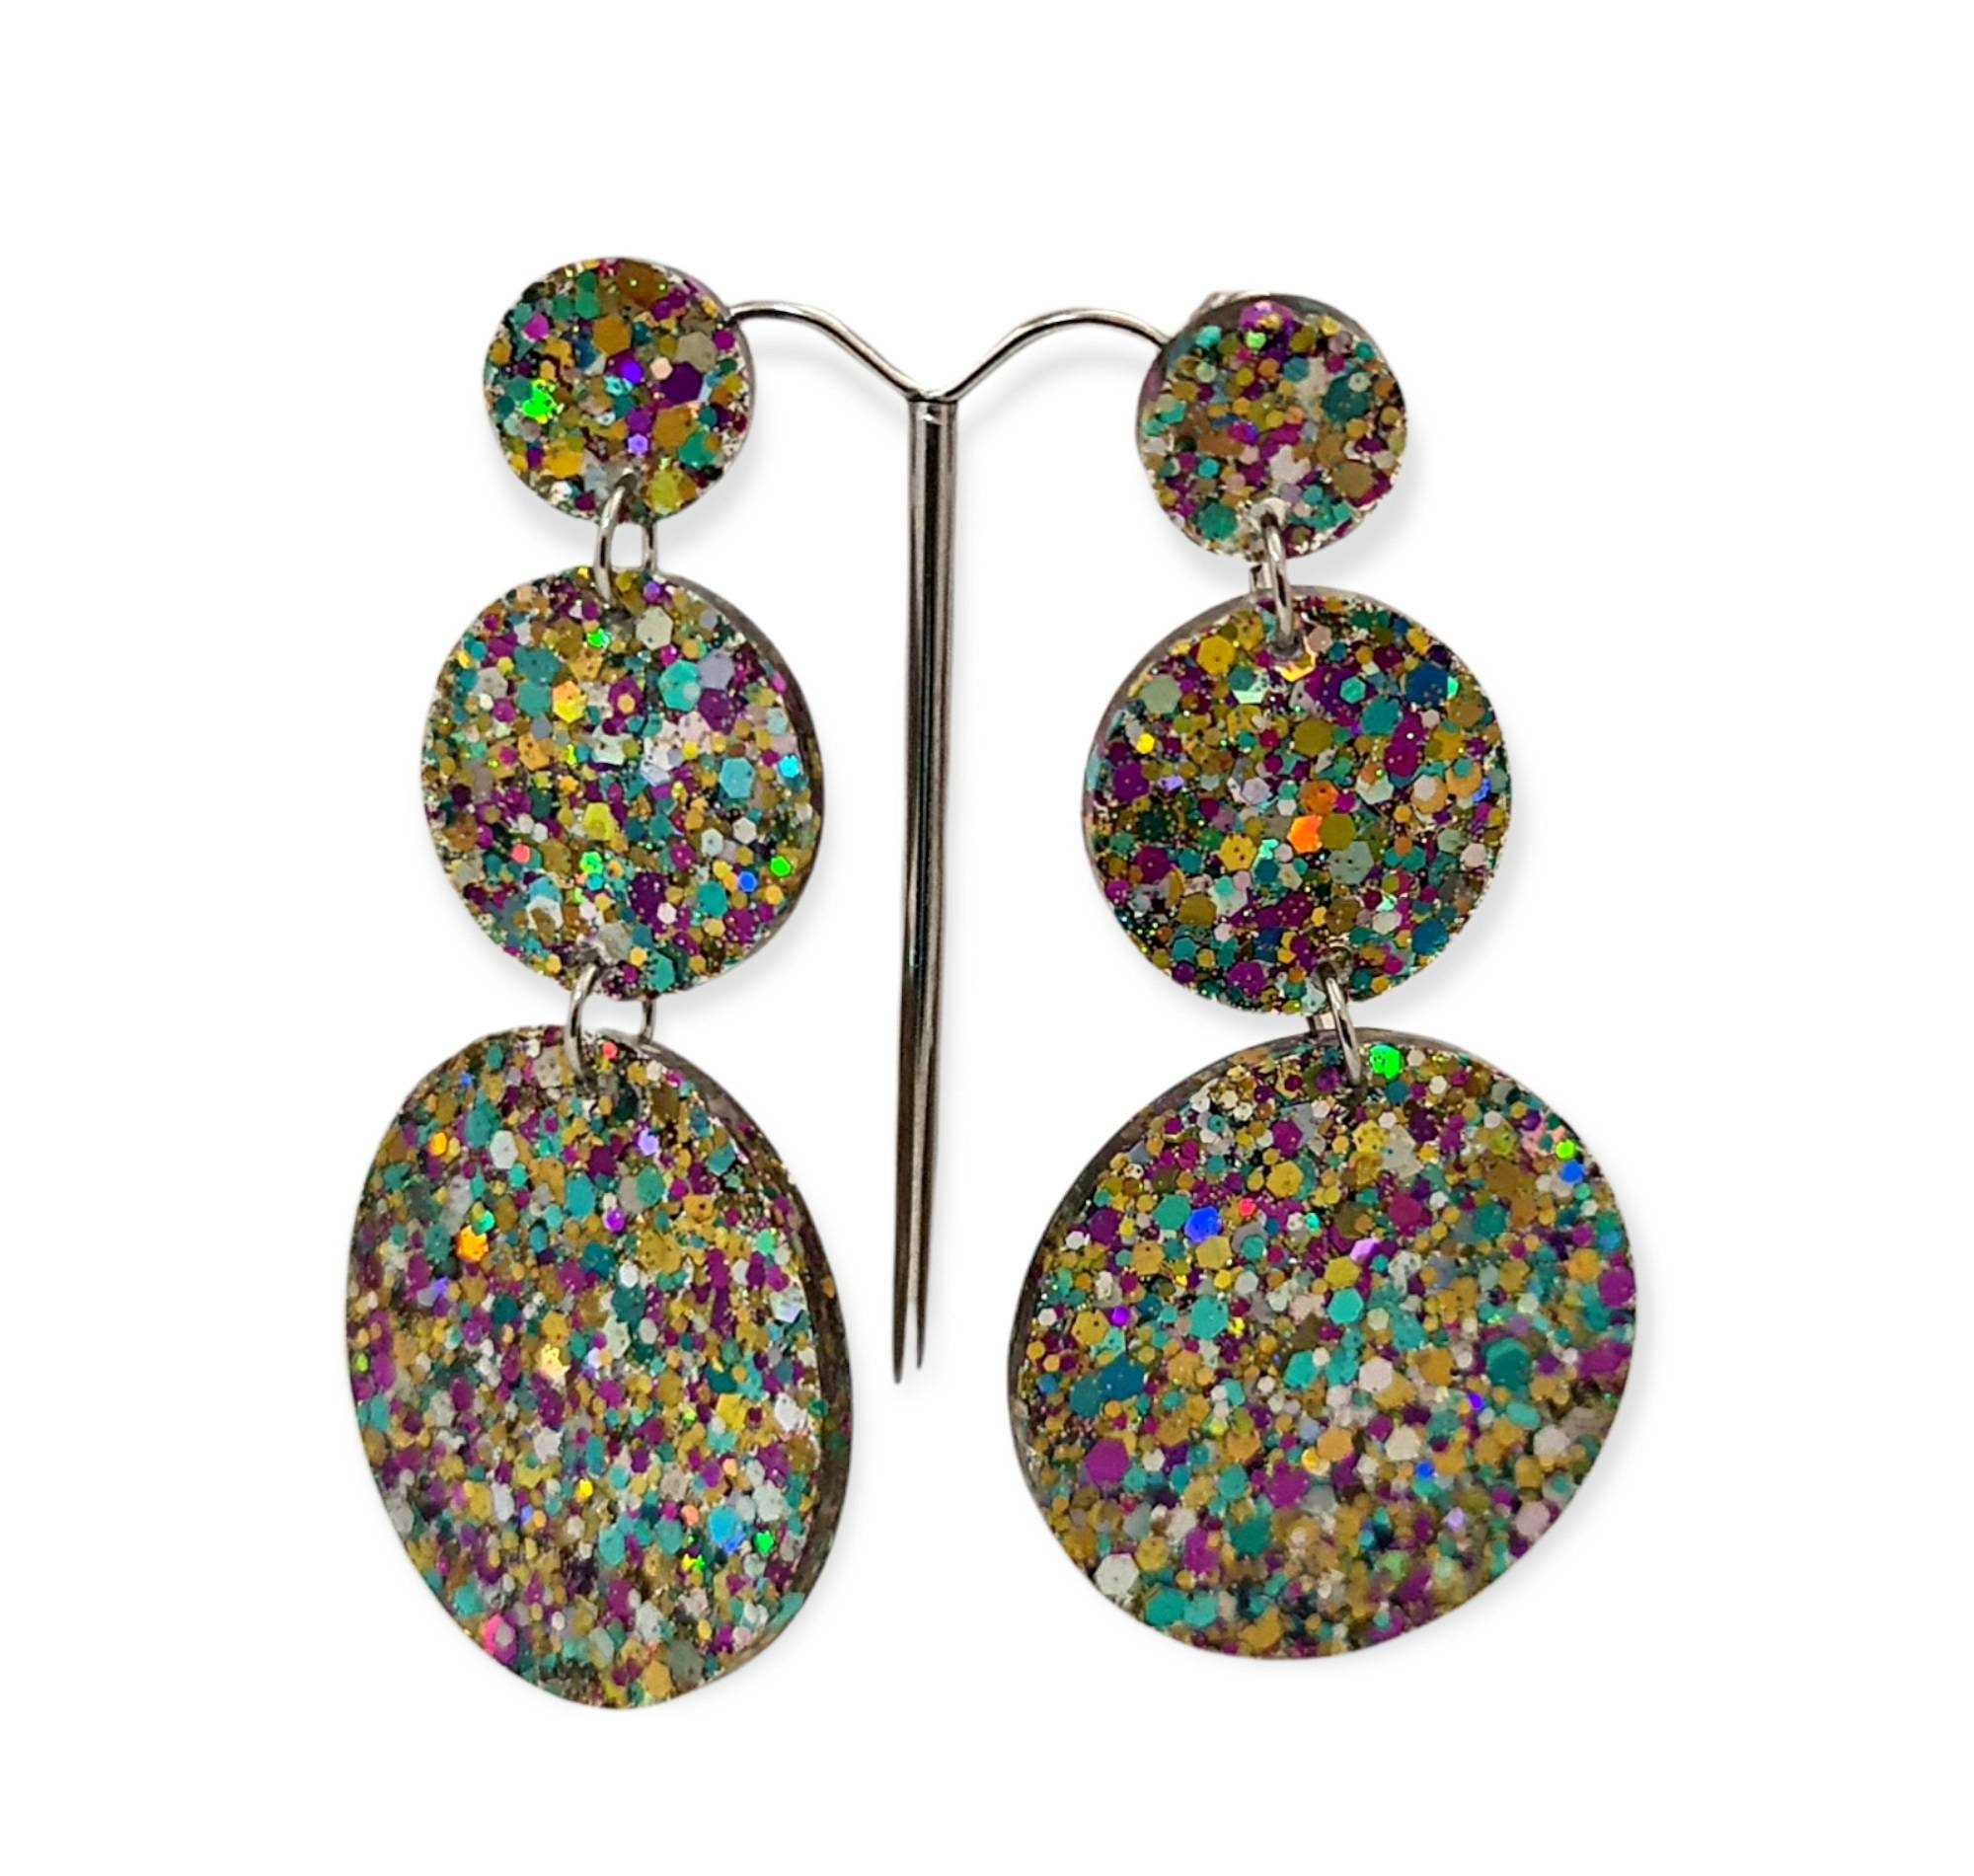 14 mm you shine on the day .. epoxy stainless steel earrings